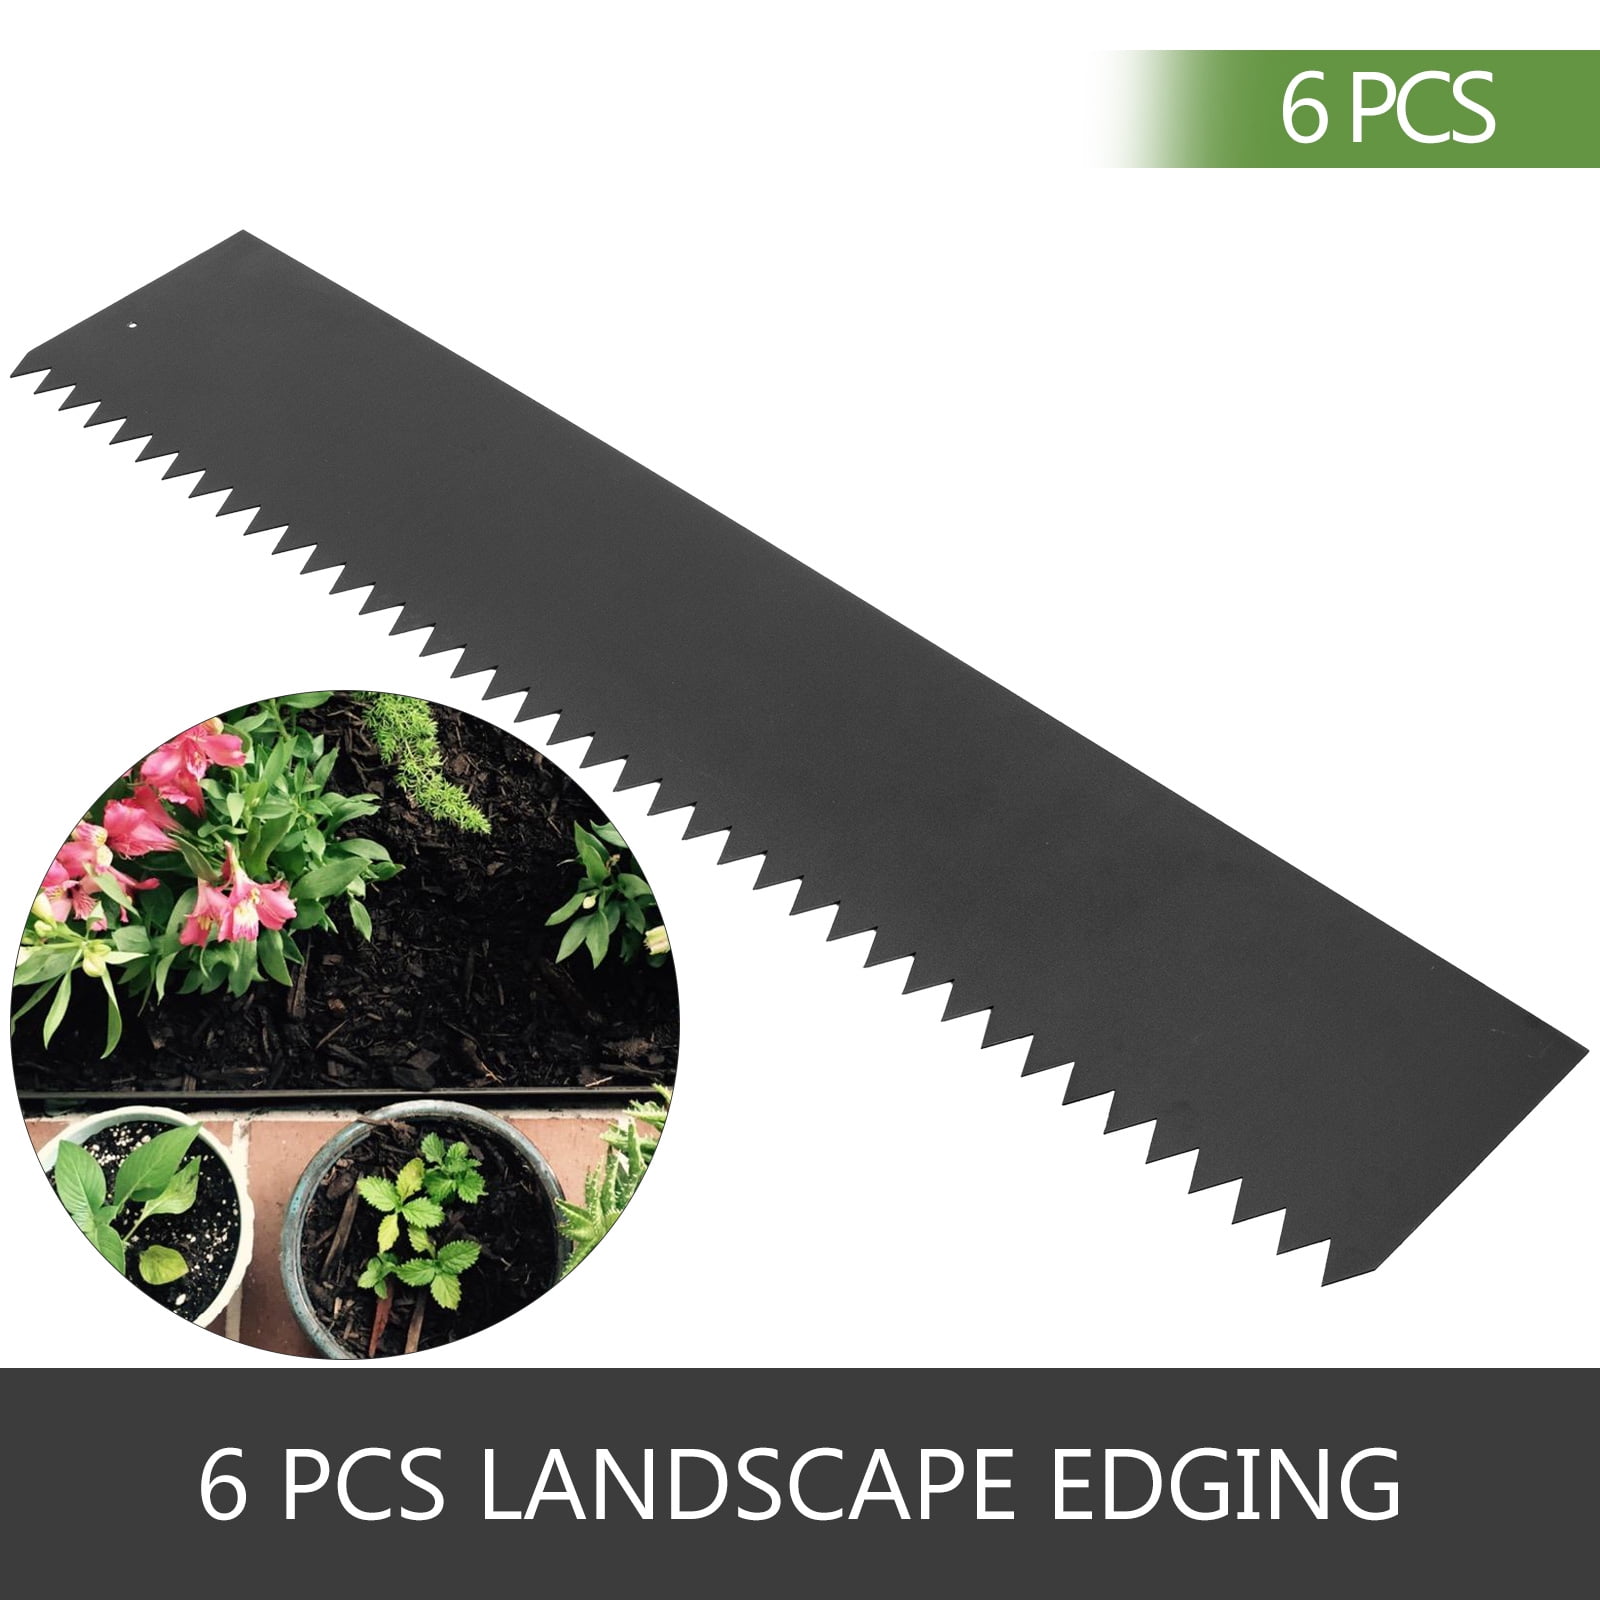 Steel Landscape Edging Steel Edging for Landscaping 4pcs 40 x 8 Inch Lawn Edging 